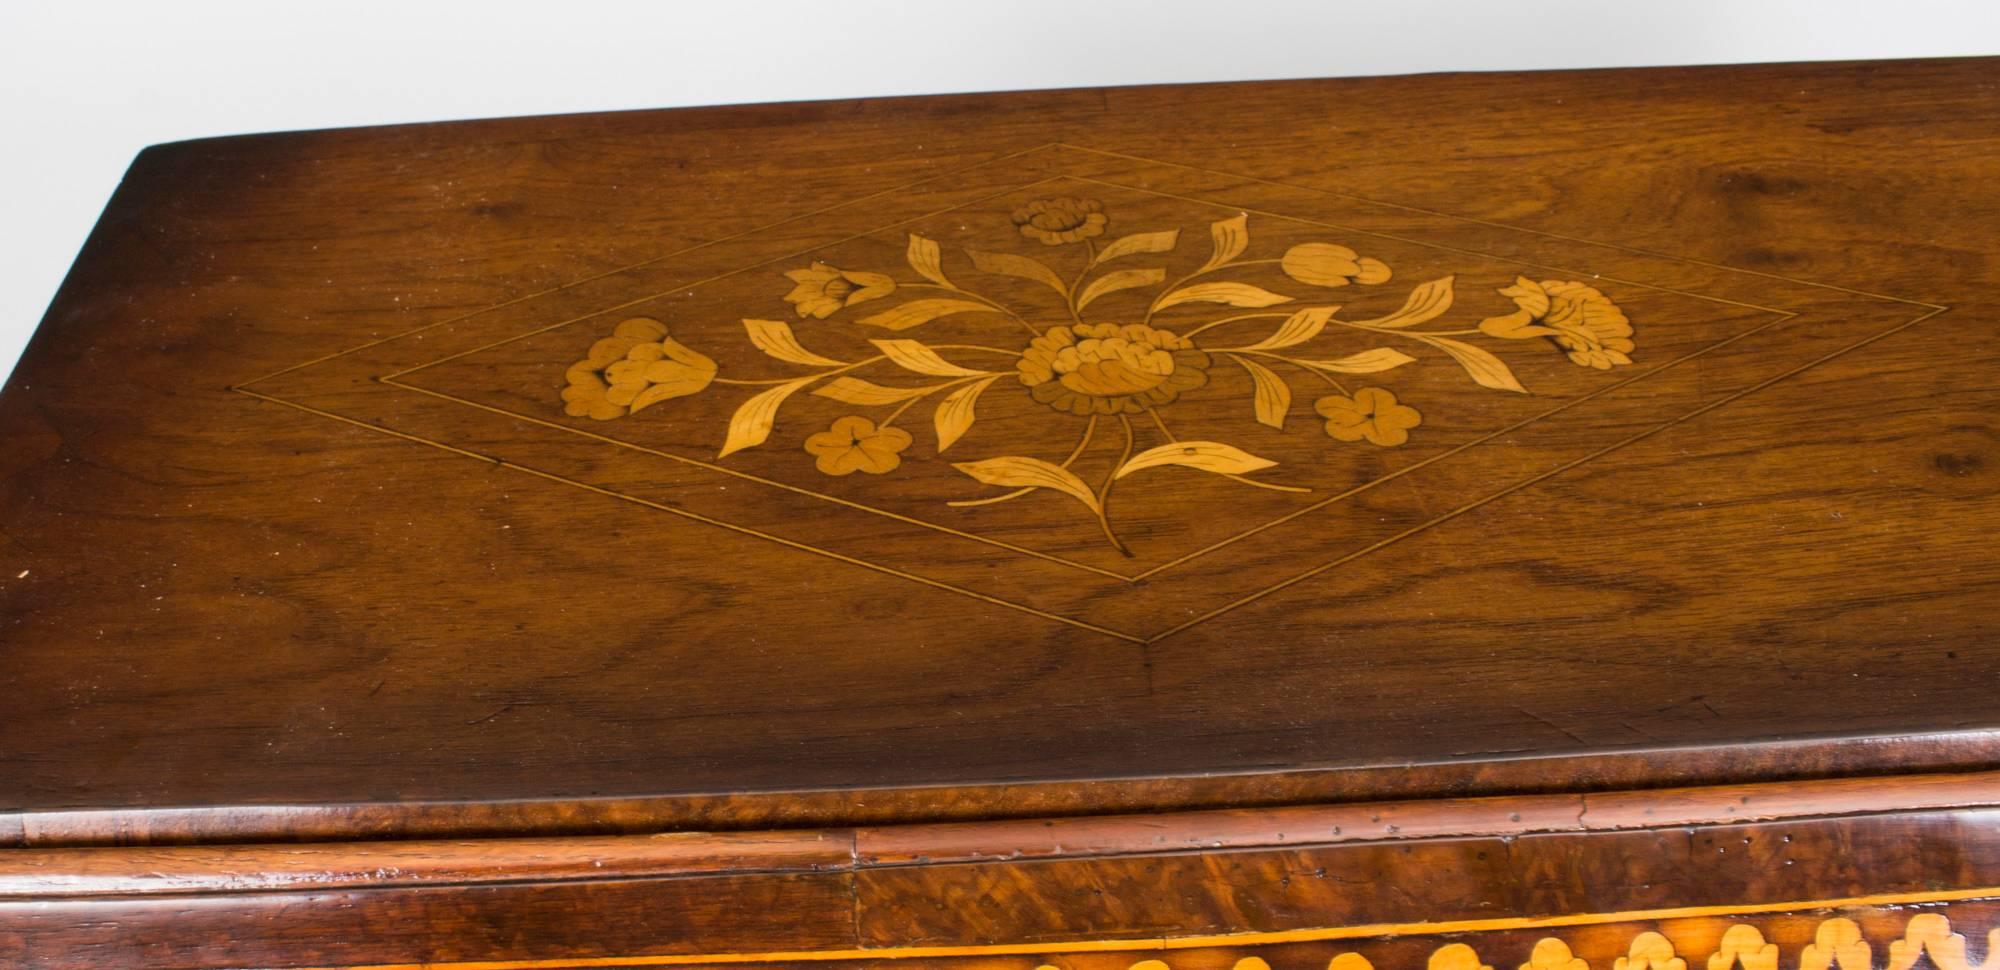 This is a wonderful antique late 18th century Dutch burr walnut and marquetry bombe' bureau.

It has been accomplished in burr walnut, with exquisite hand cut floral marquetry typical of the very best pieces of period Dutch furniture.

The